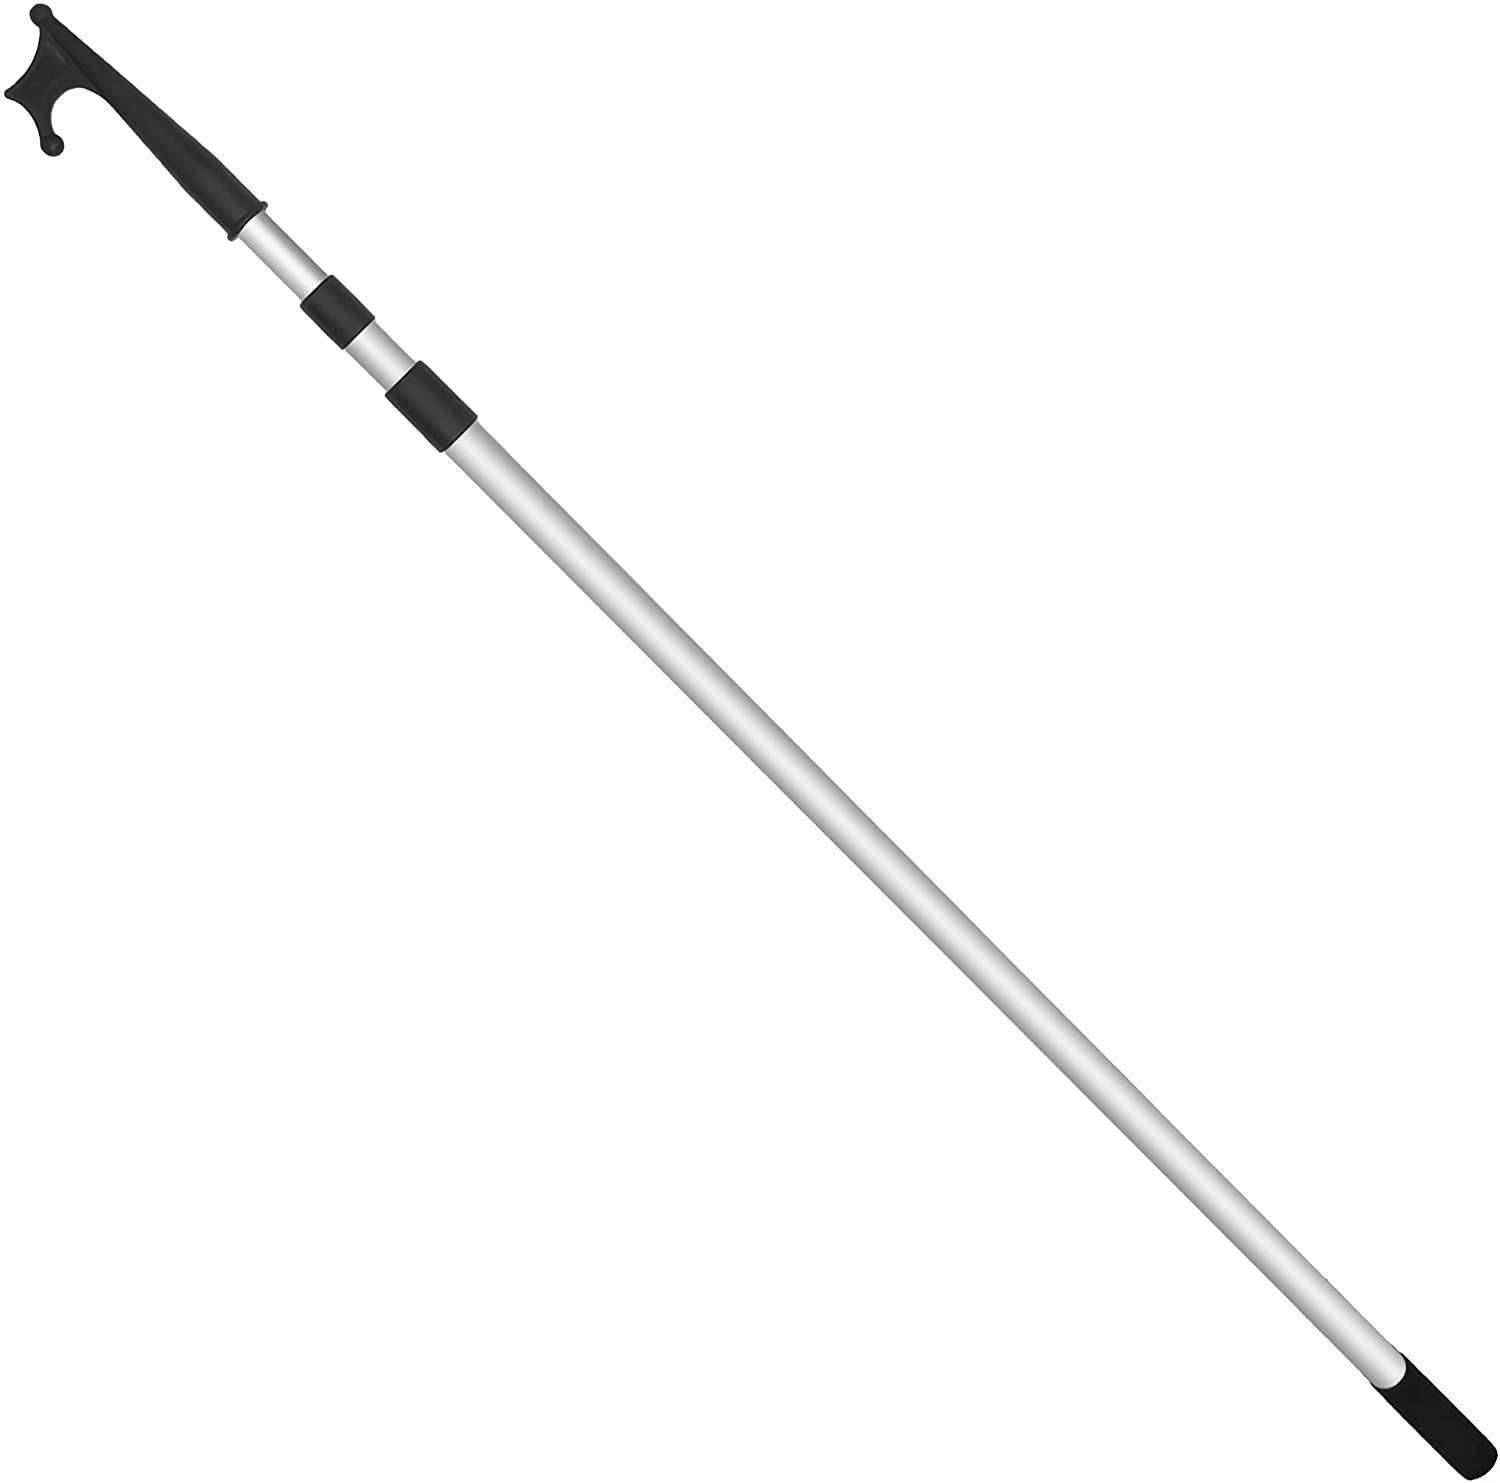 Telescoping Aluminum Boat Hook, Extends from 4-1/2 ft / 56 in (142cm) to 12 ft / 144 in (366cm), Anodized Aluminum shaft-Canadian Marine &amp; Outdoor Equipment